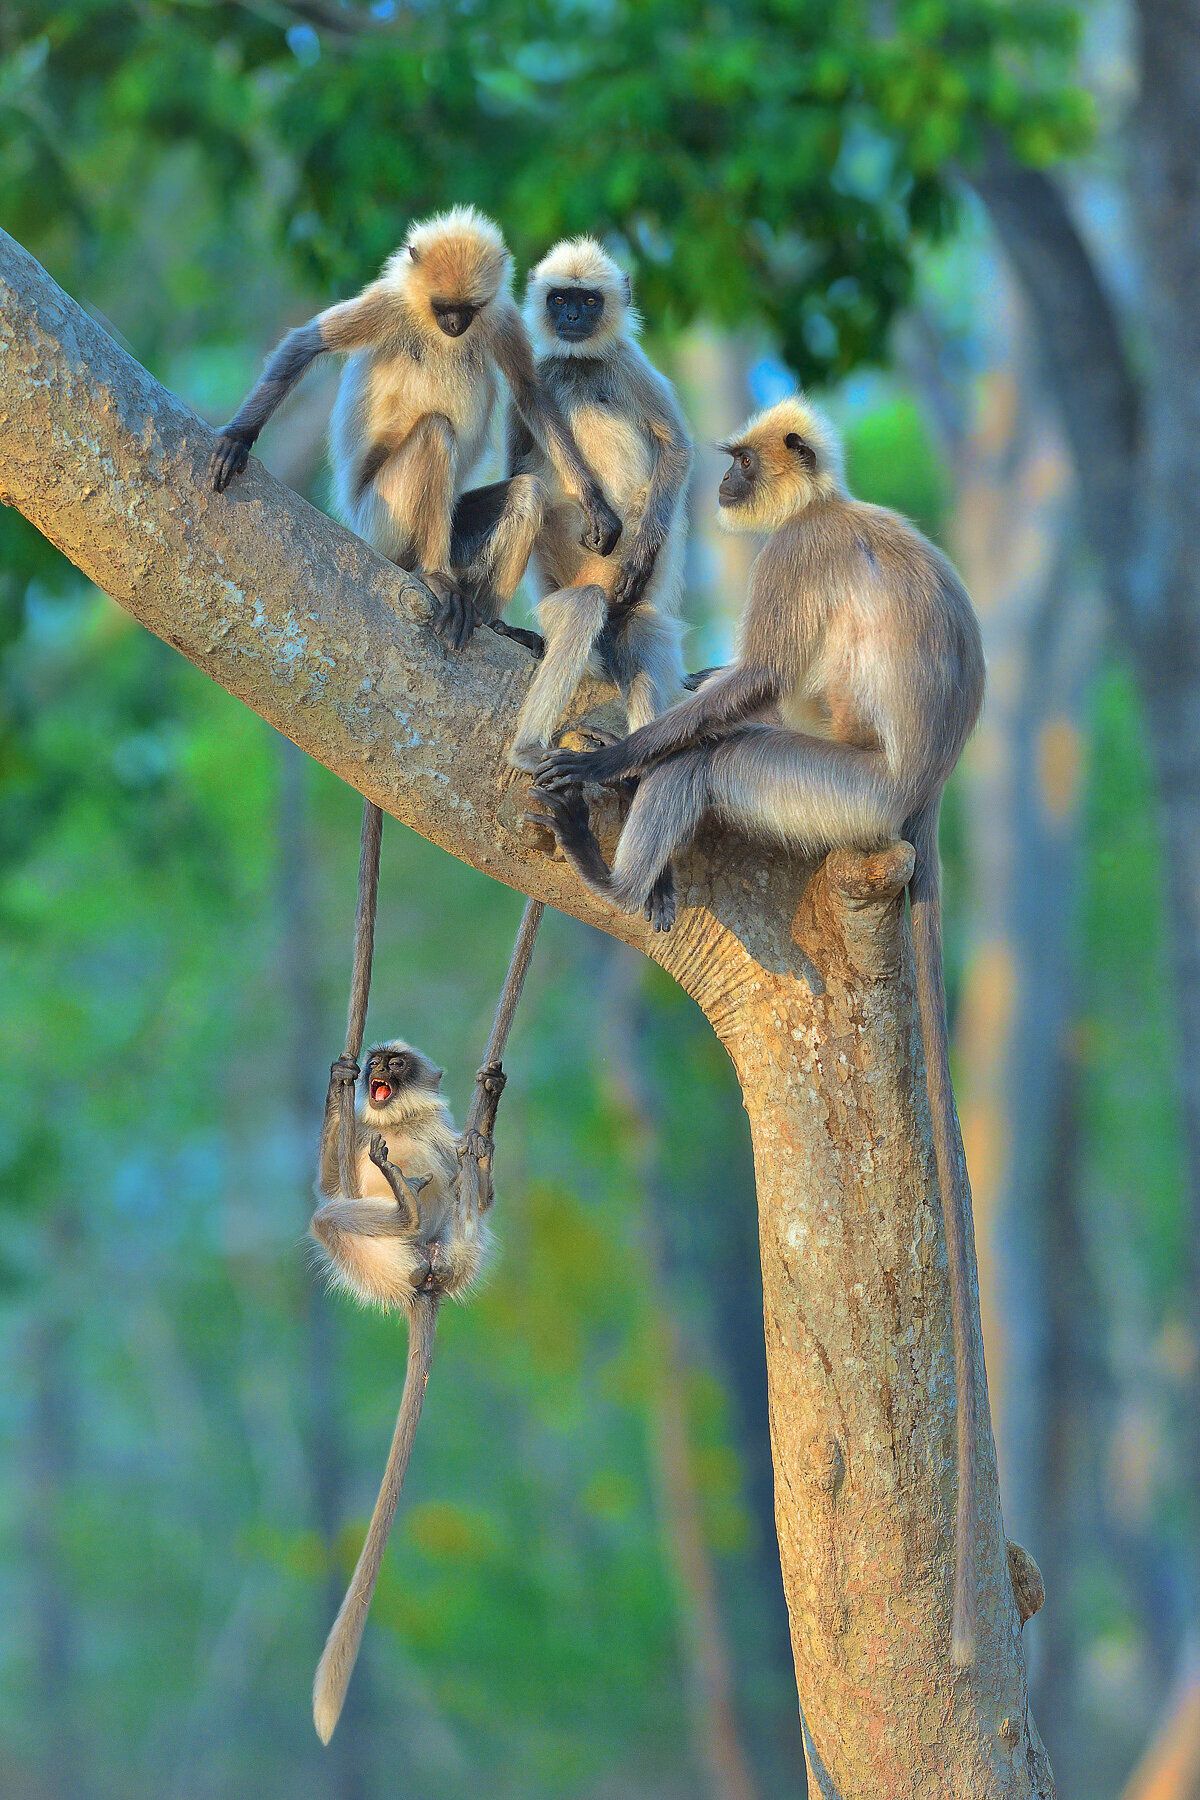 “Fun For All Ages” features langurs in Kabini, India.